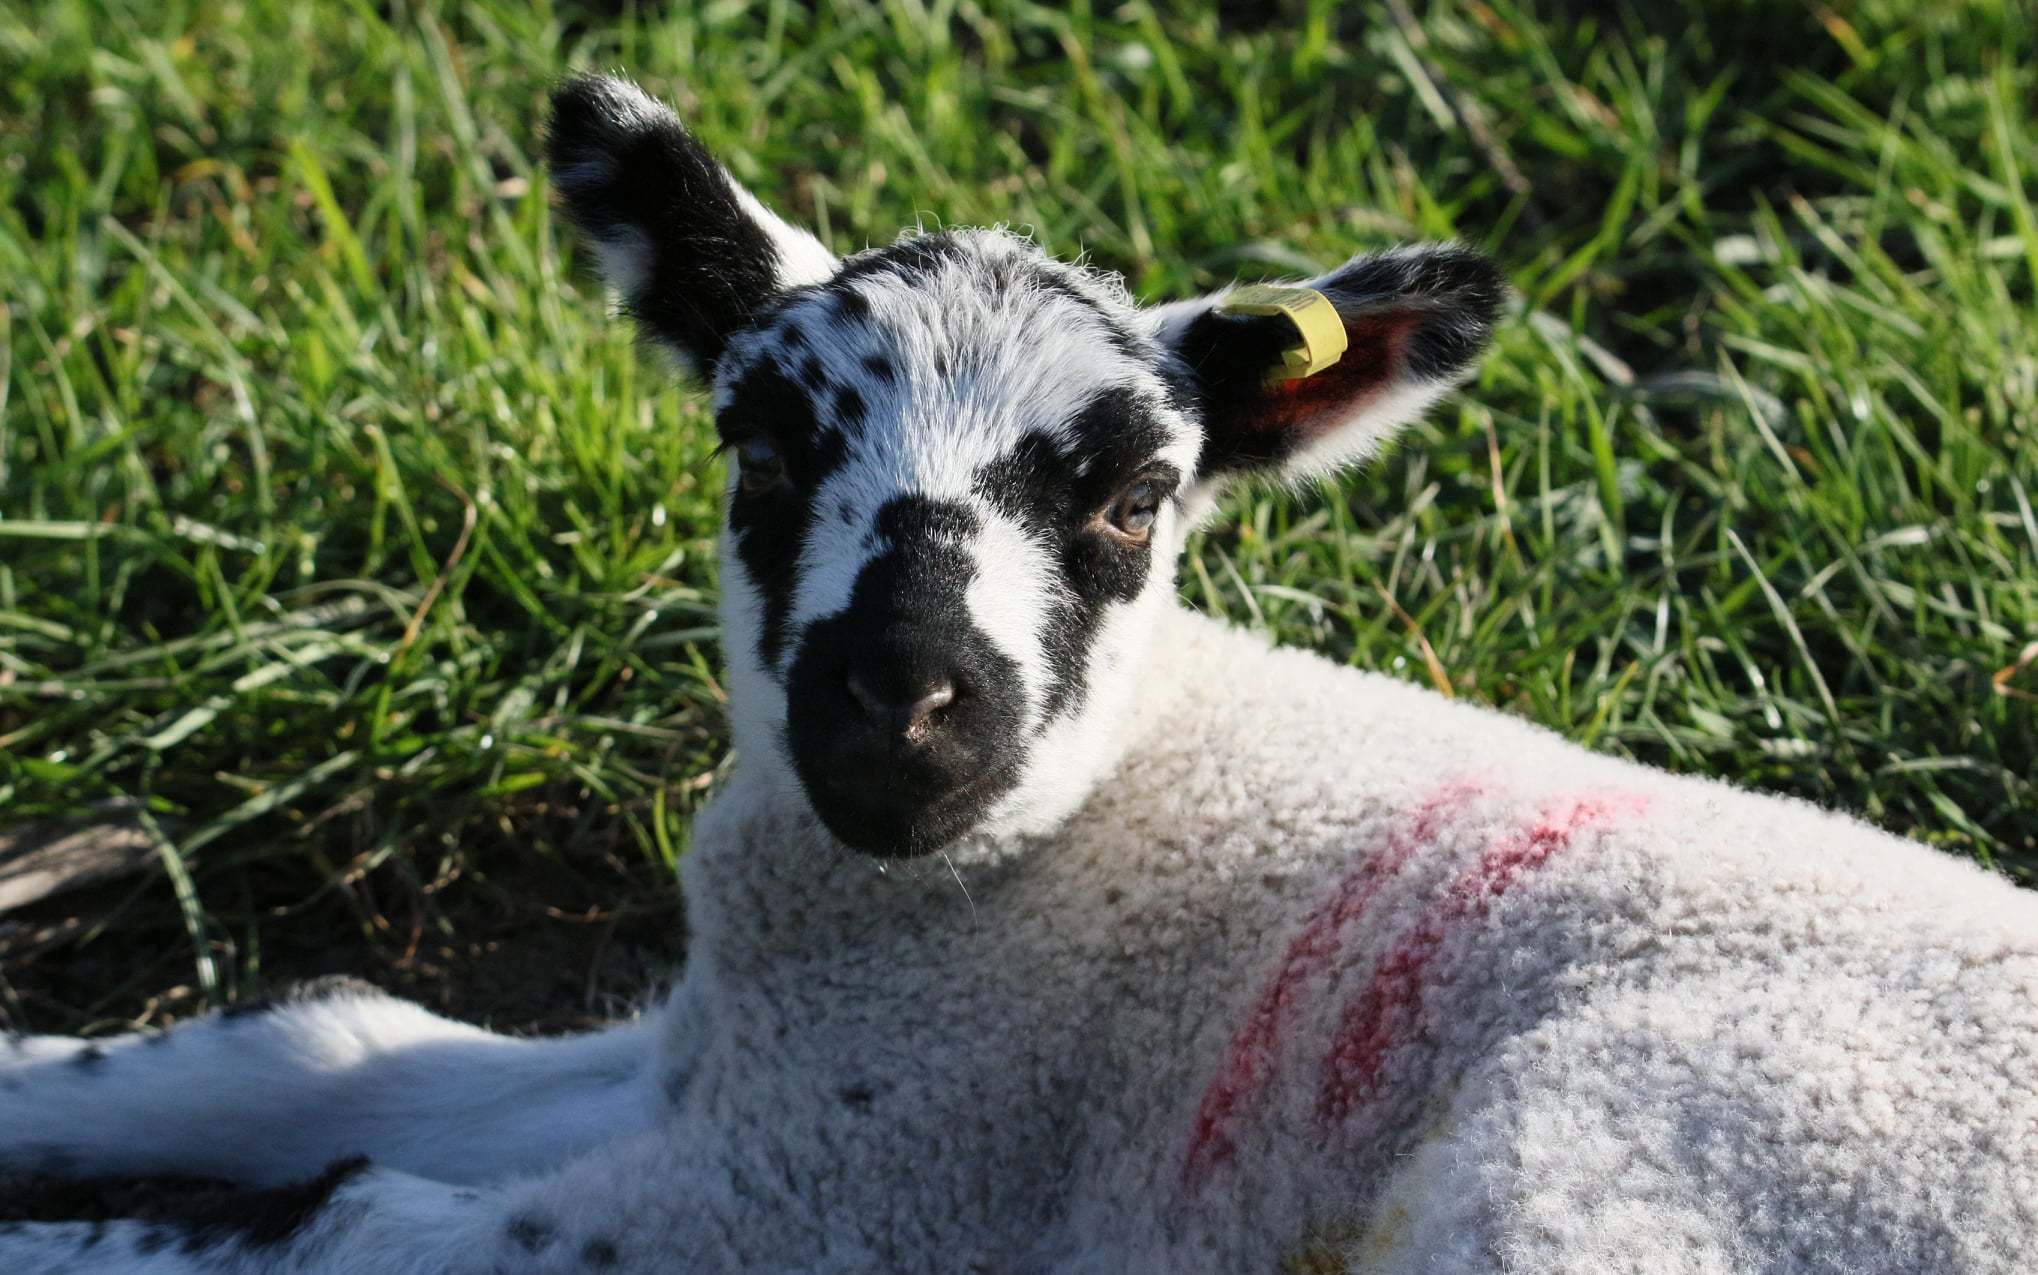 Claire Andrews also took this shot of a spring lamb